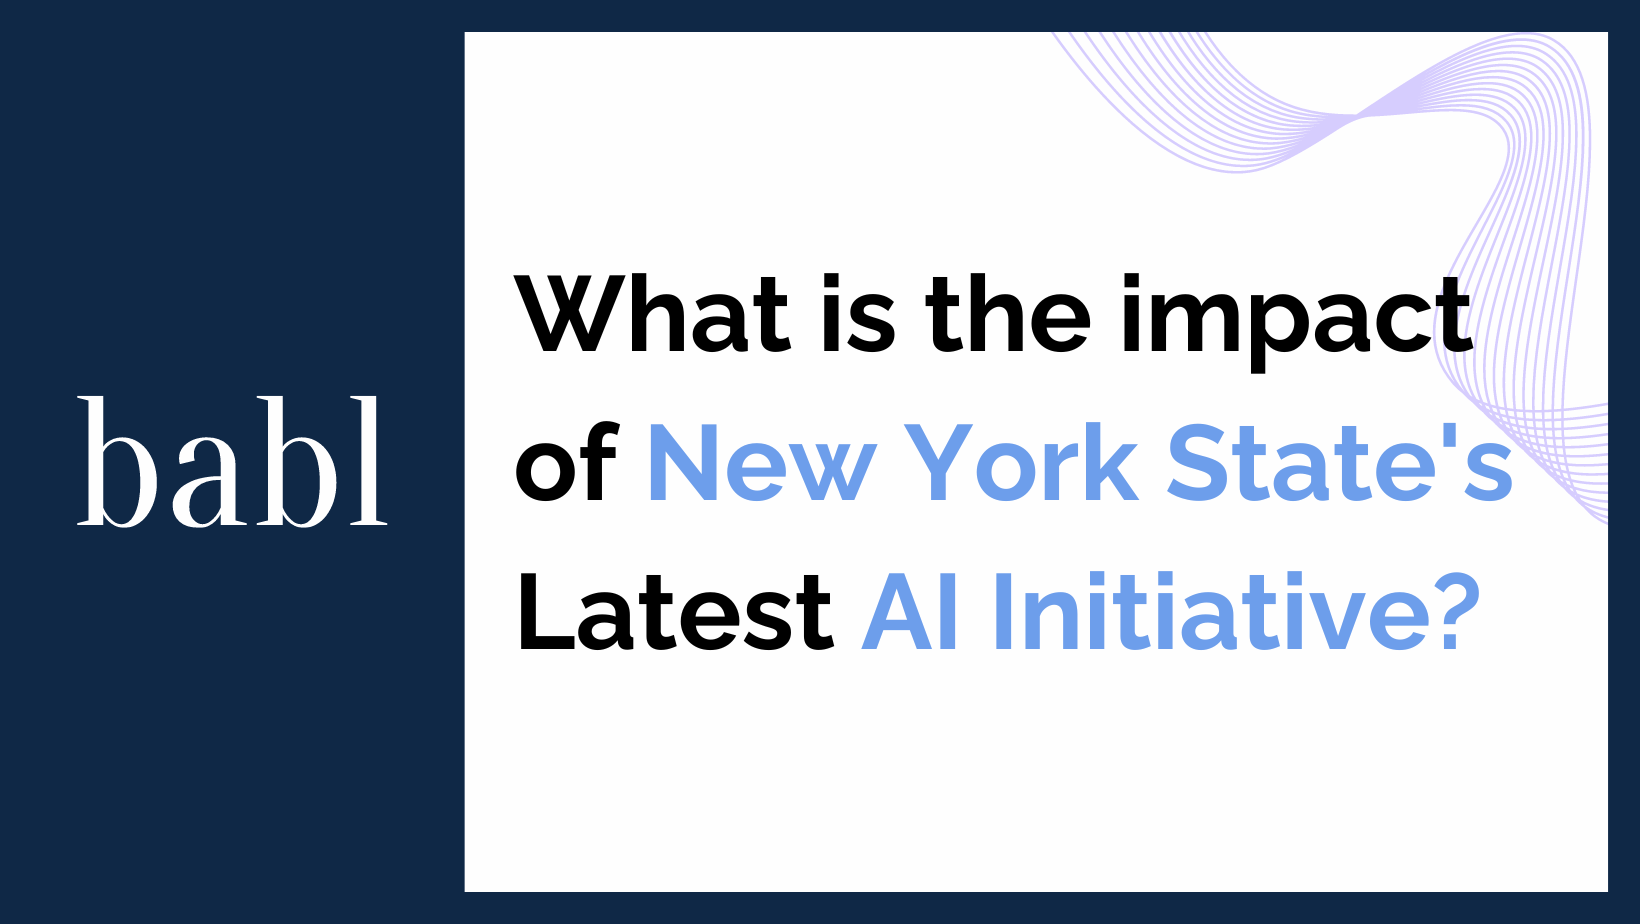 What is the impact of New York State’s Latest AI Initiative?